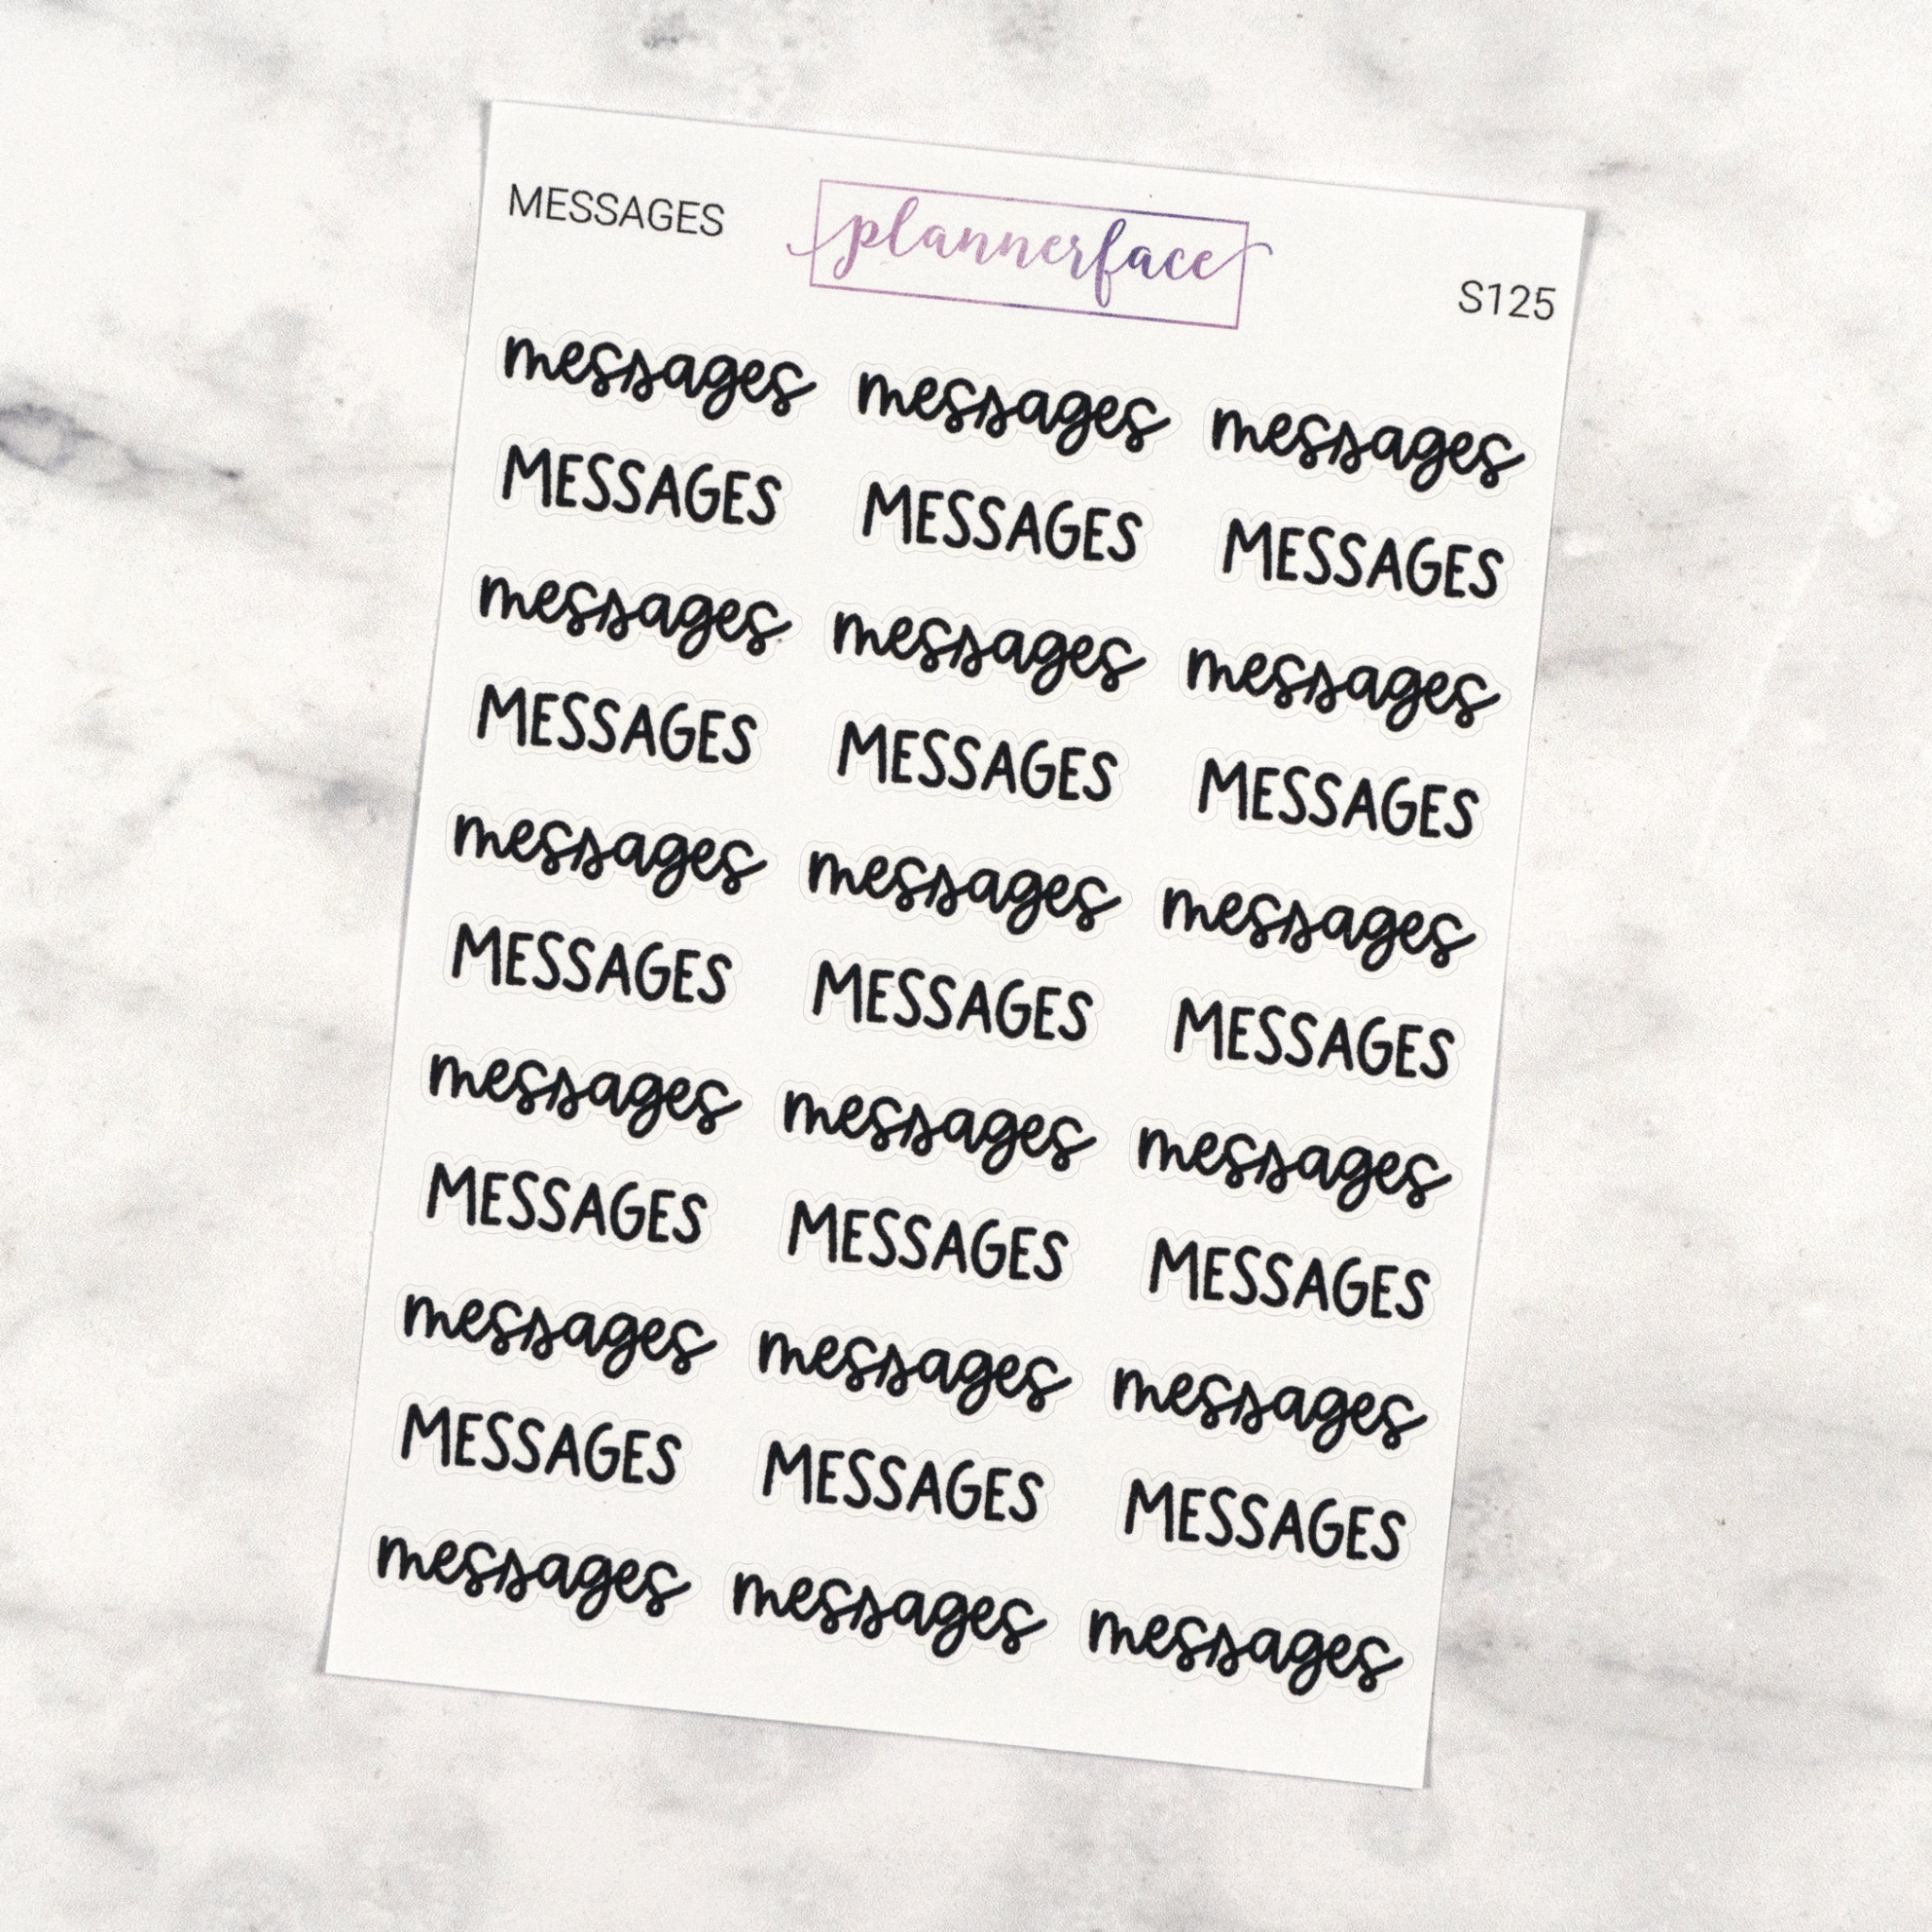 Messages | Scripts by Plannerface